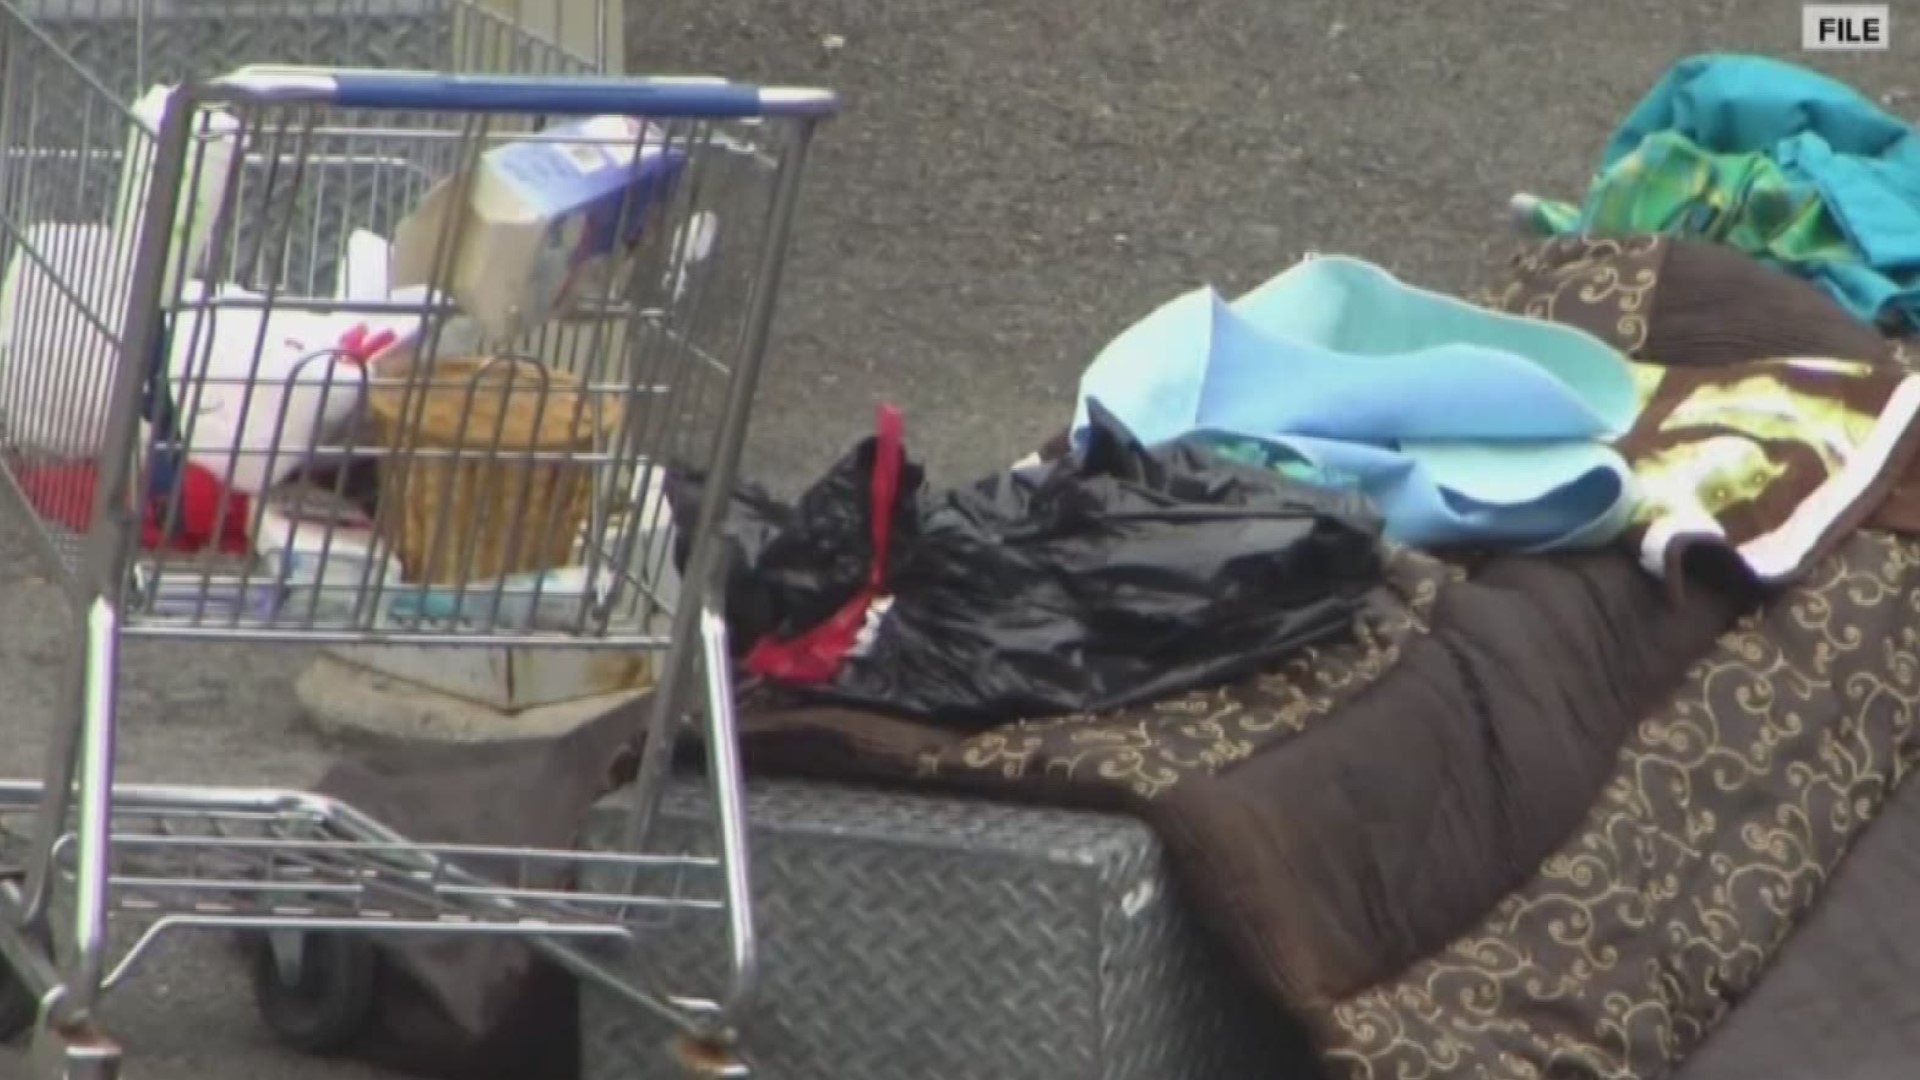 A new law will try to help Maine's homeless get help in their hometowns if the resources are there.